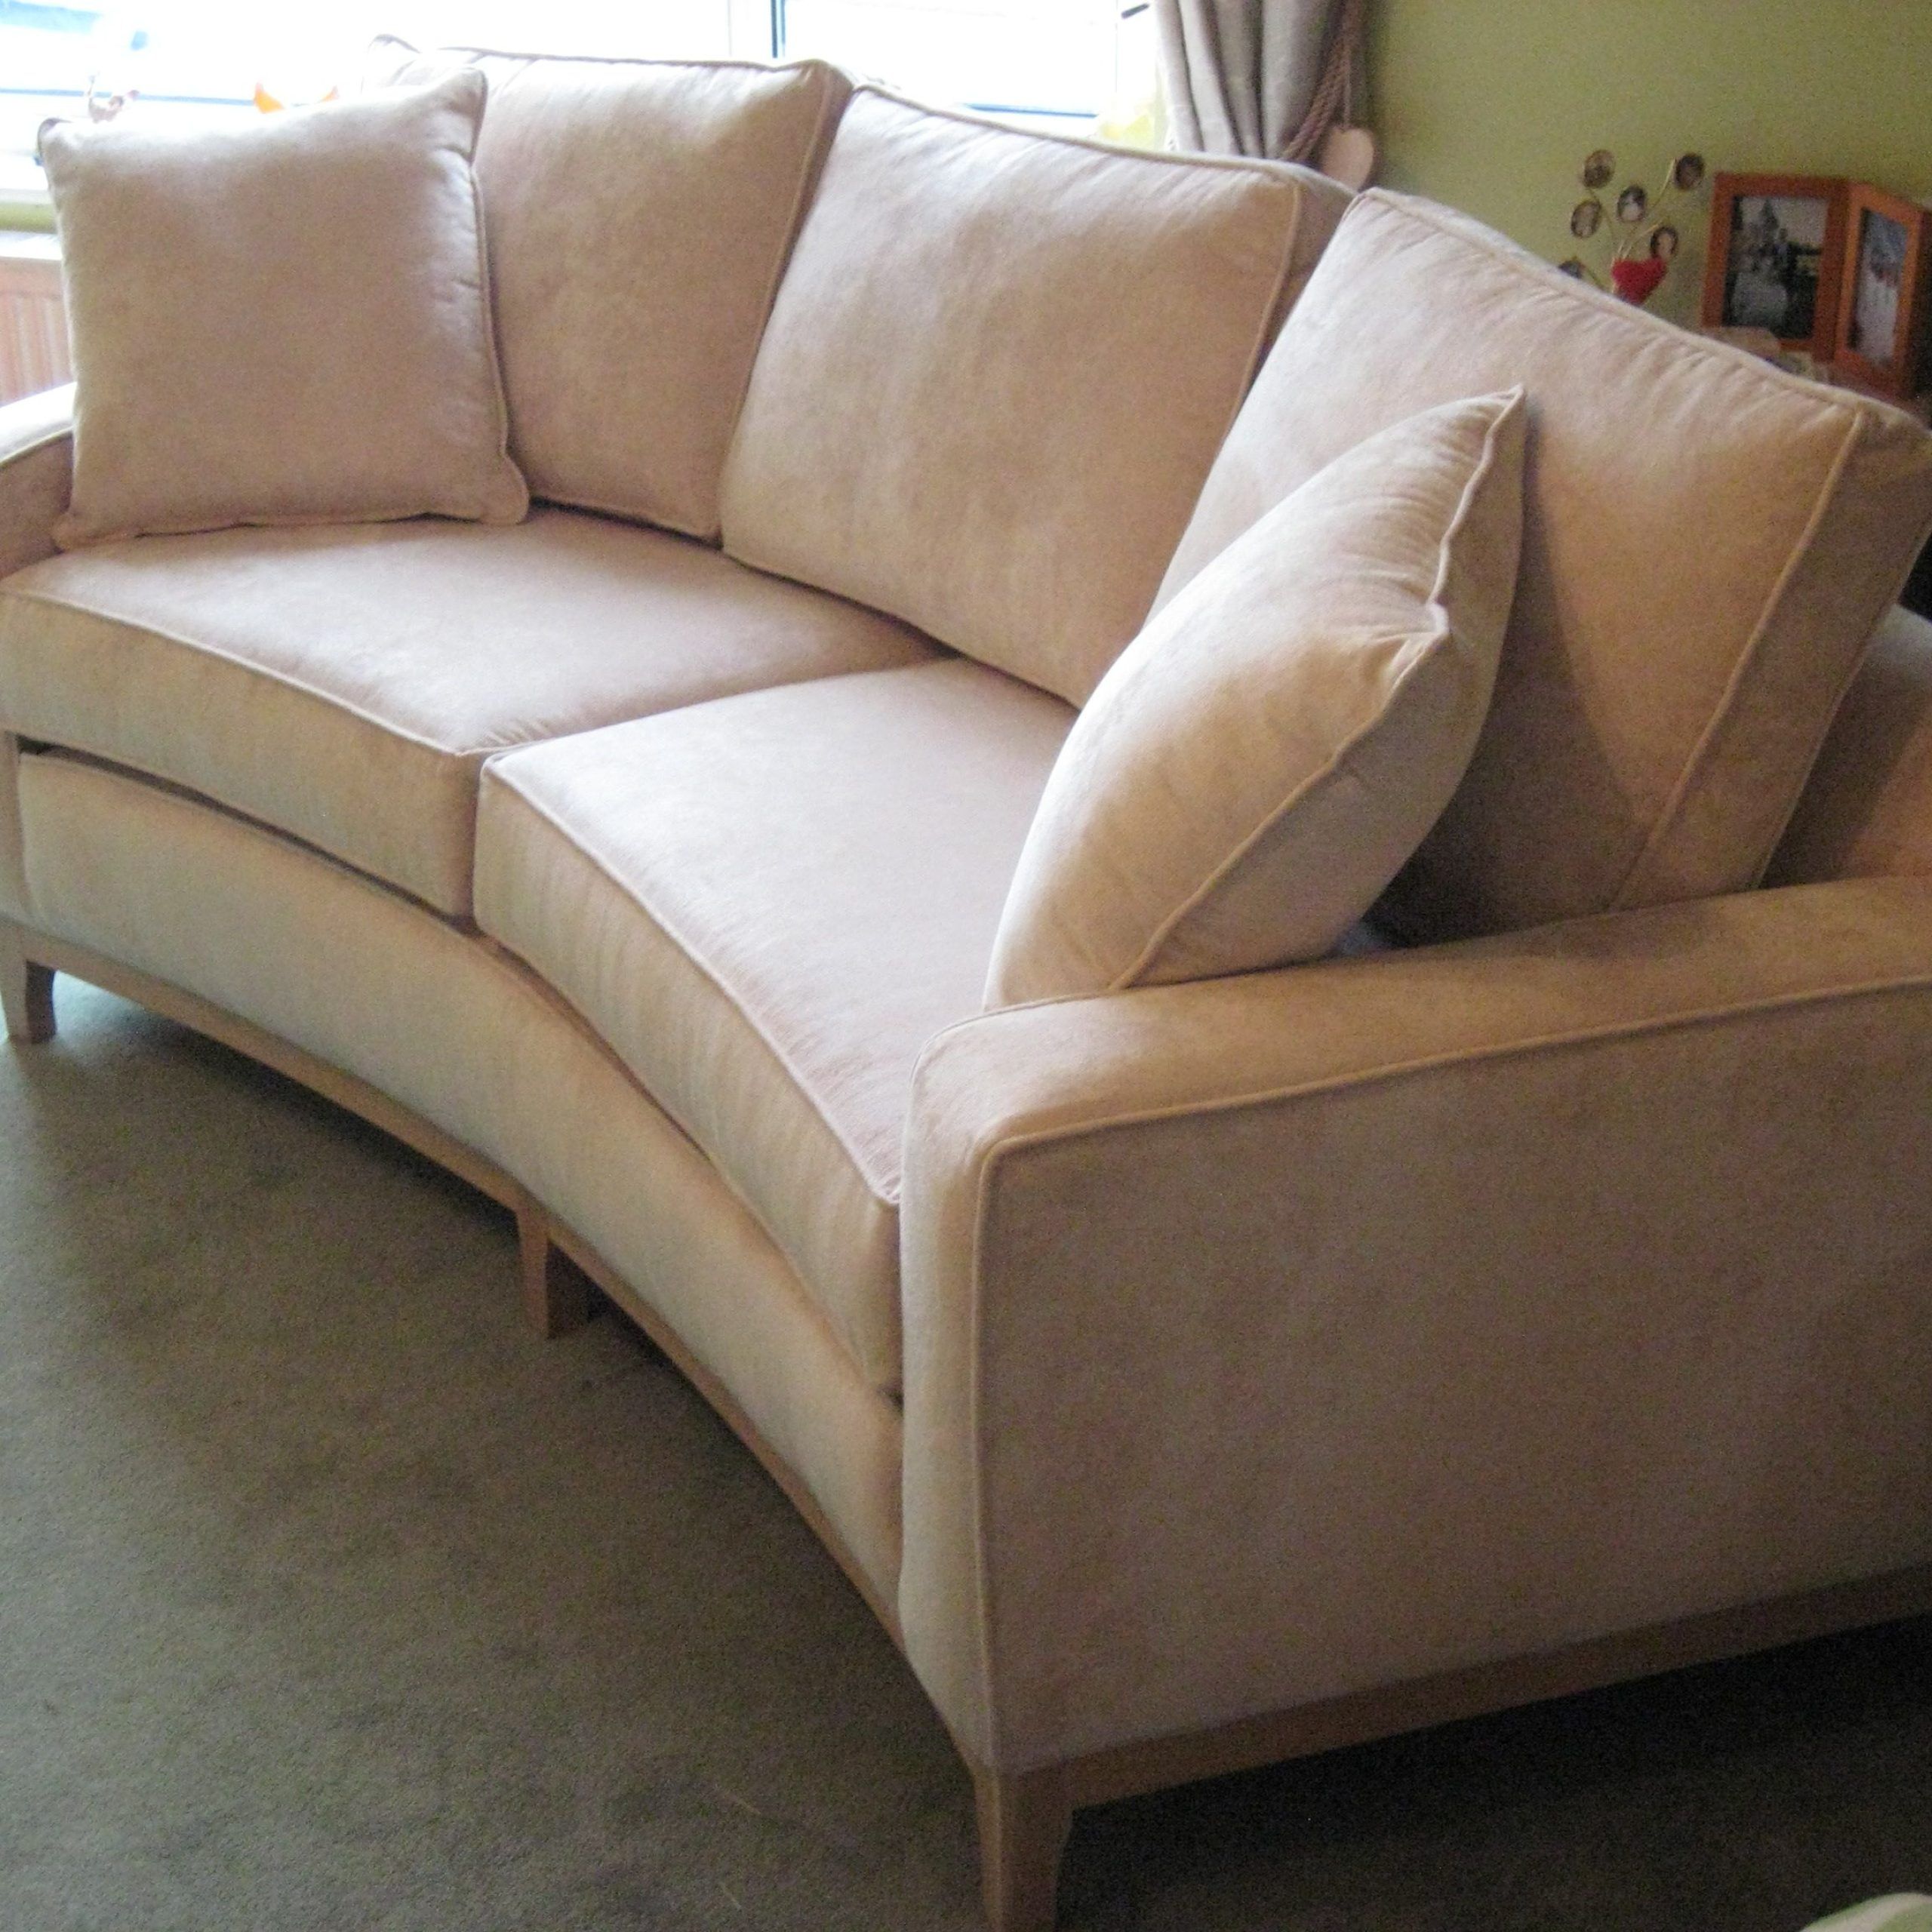 Popular Sofas With Curved Arms With Regard To 20+ Curved Couches For Small Spaces (View 12 of 15)